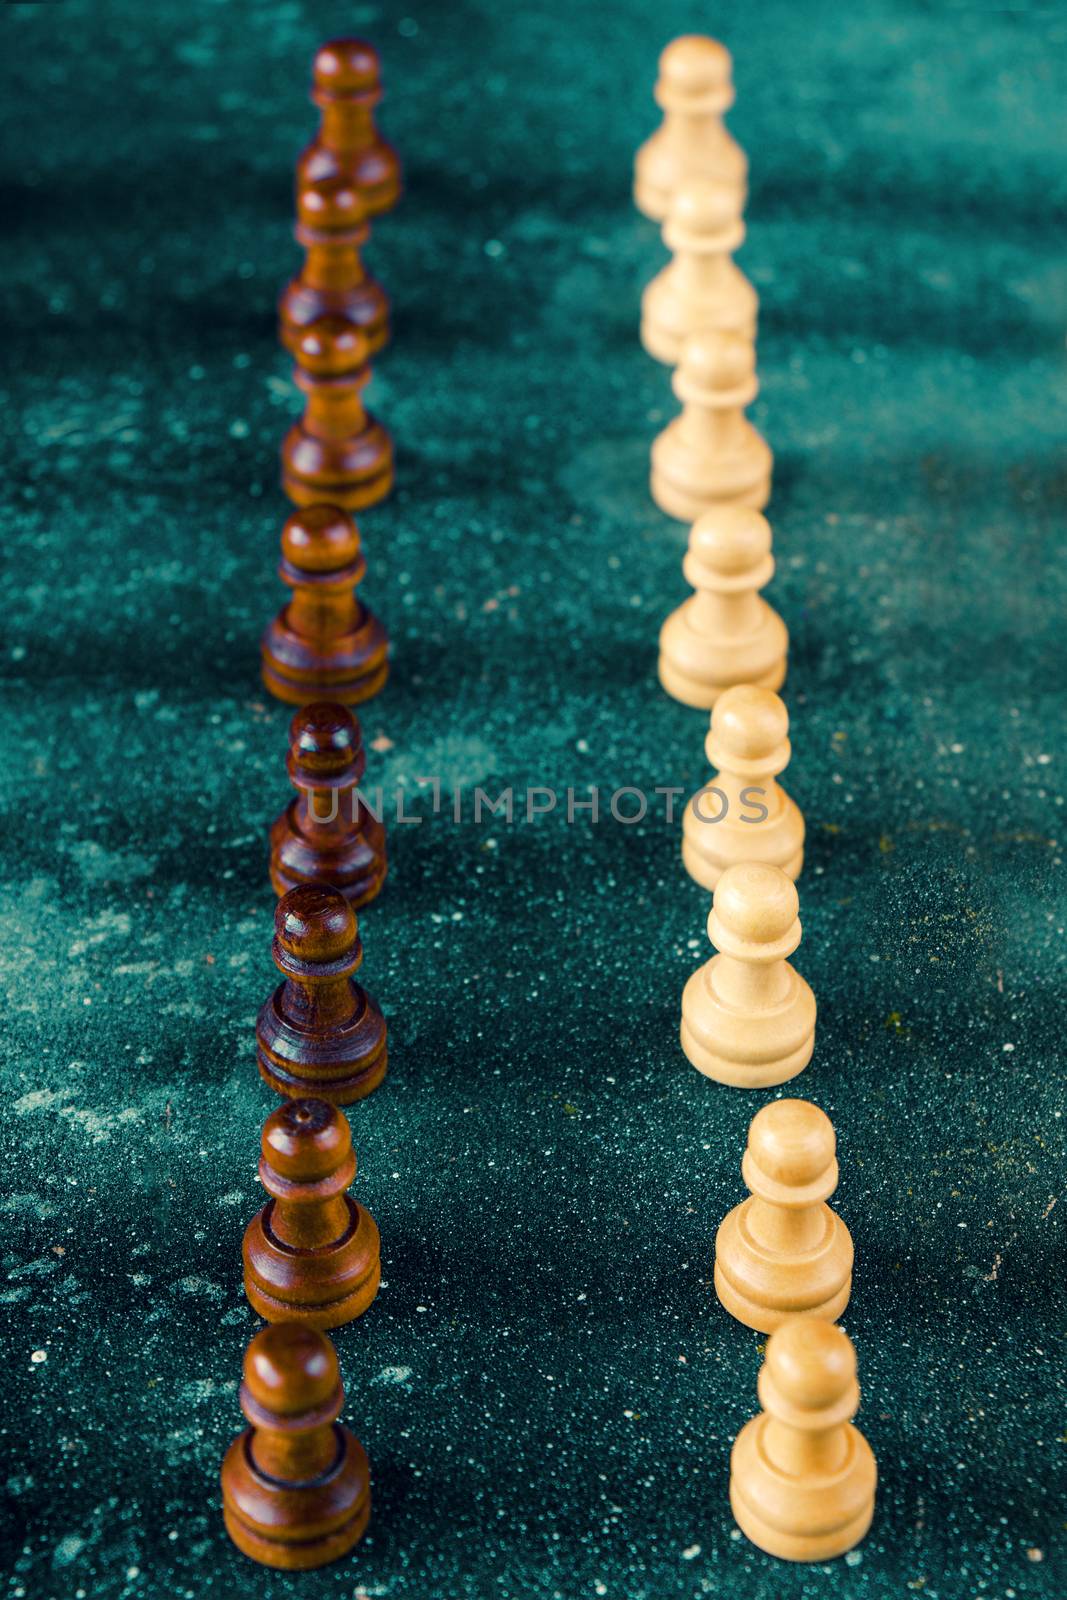 Checkmate and chess Pawn figures close-up by Taidundua